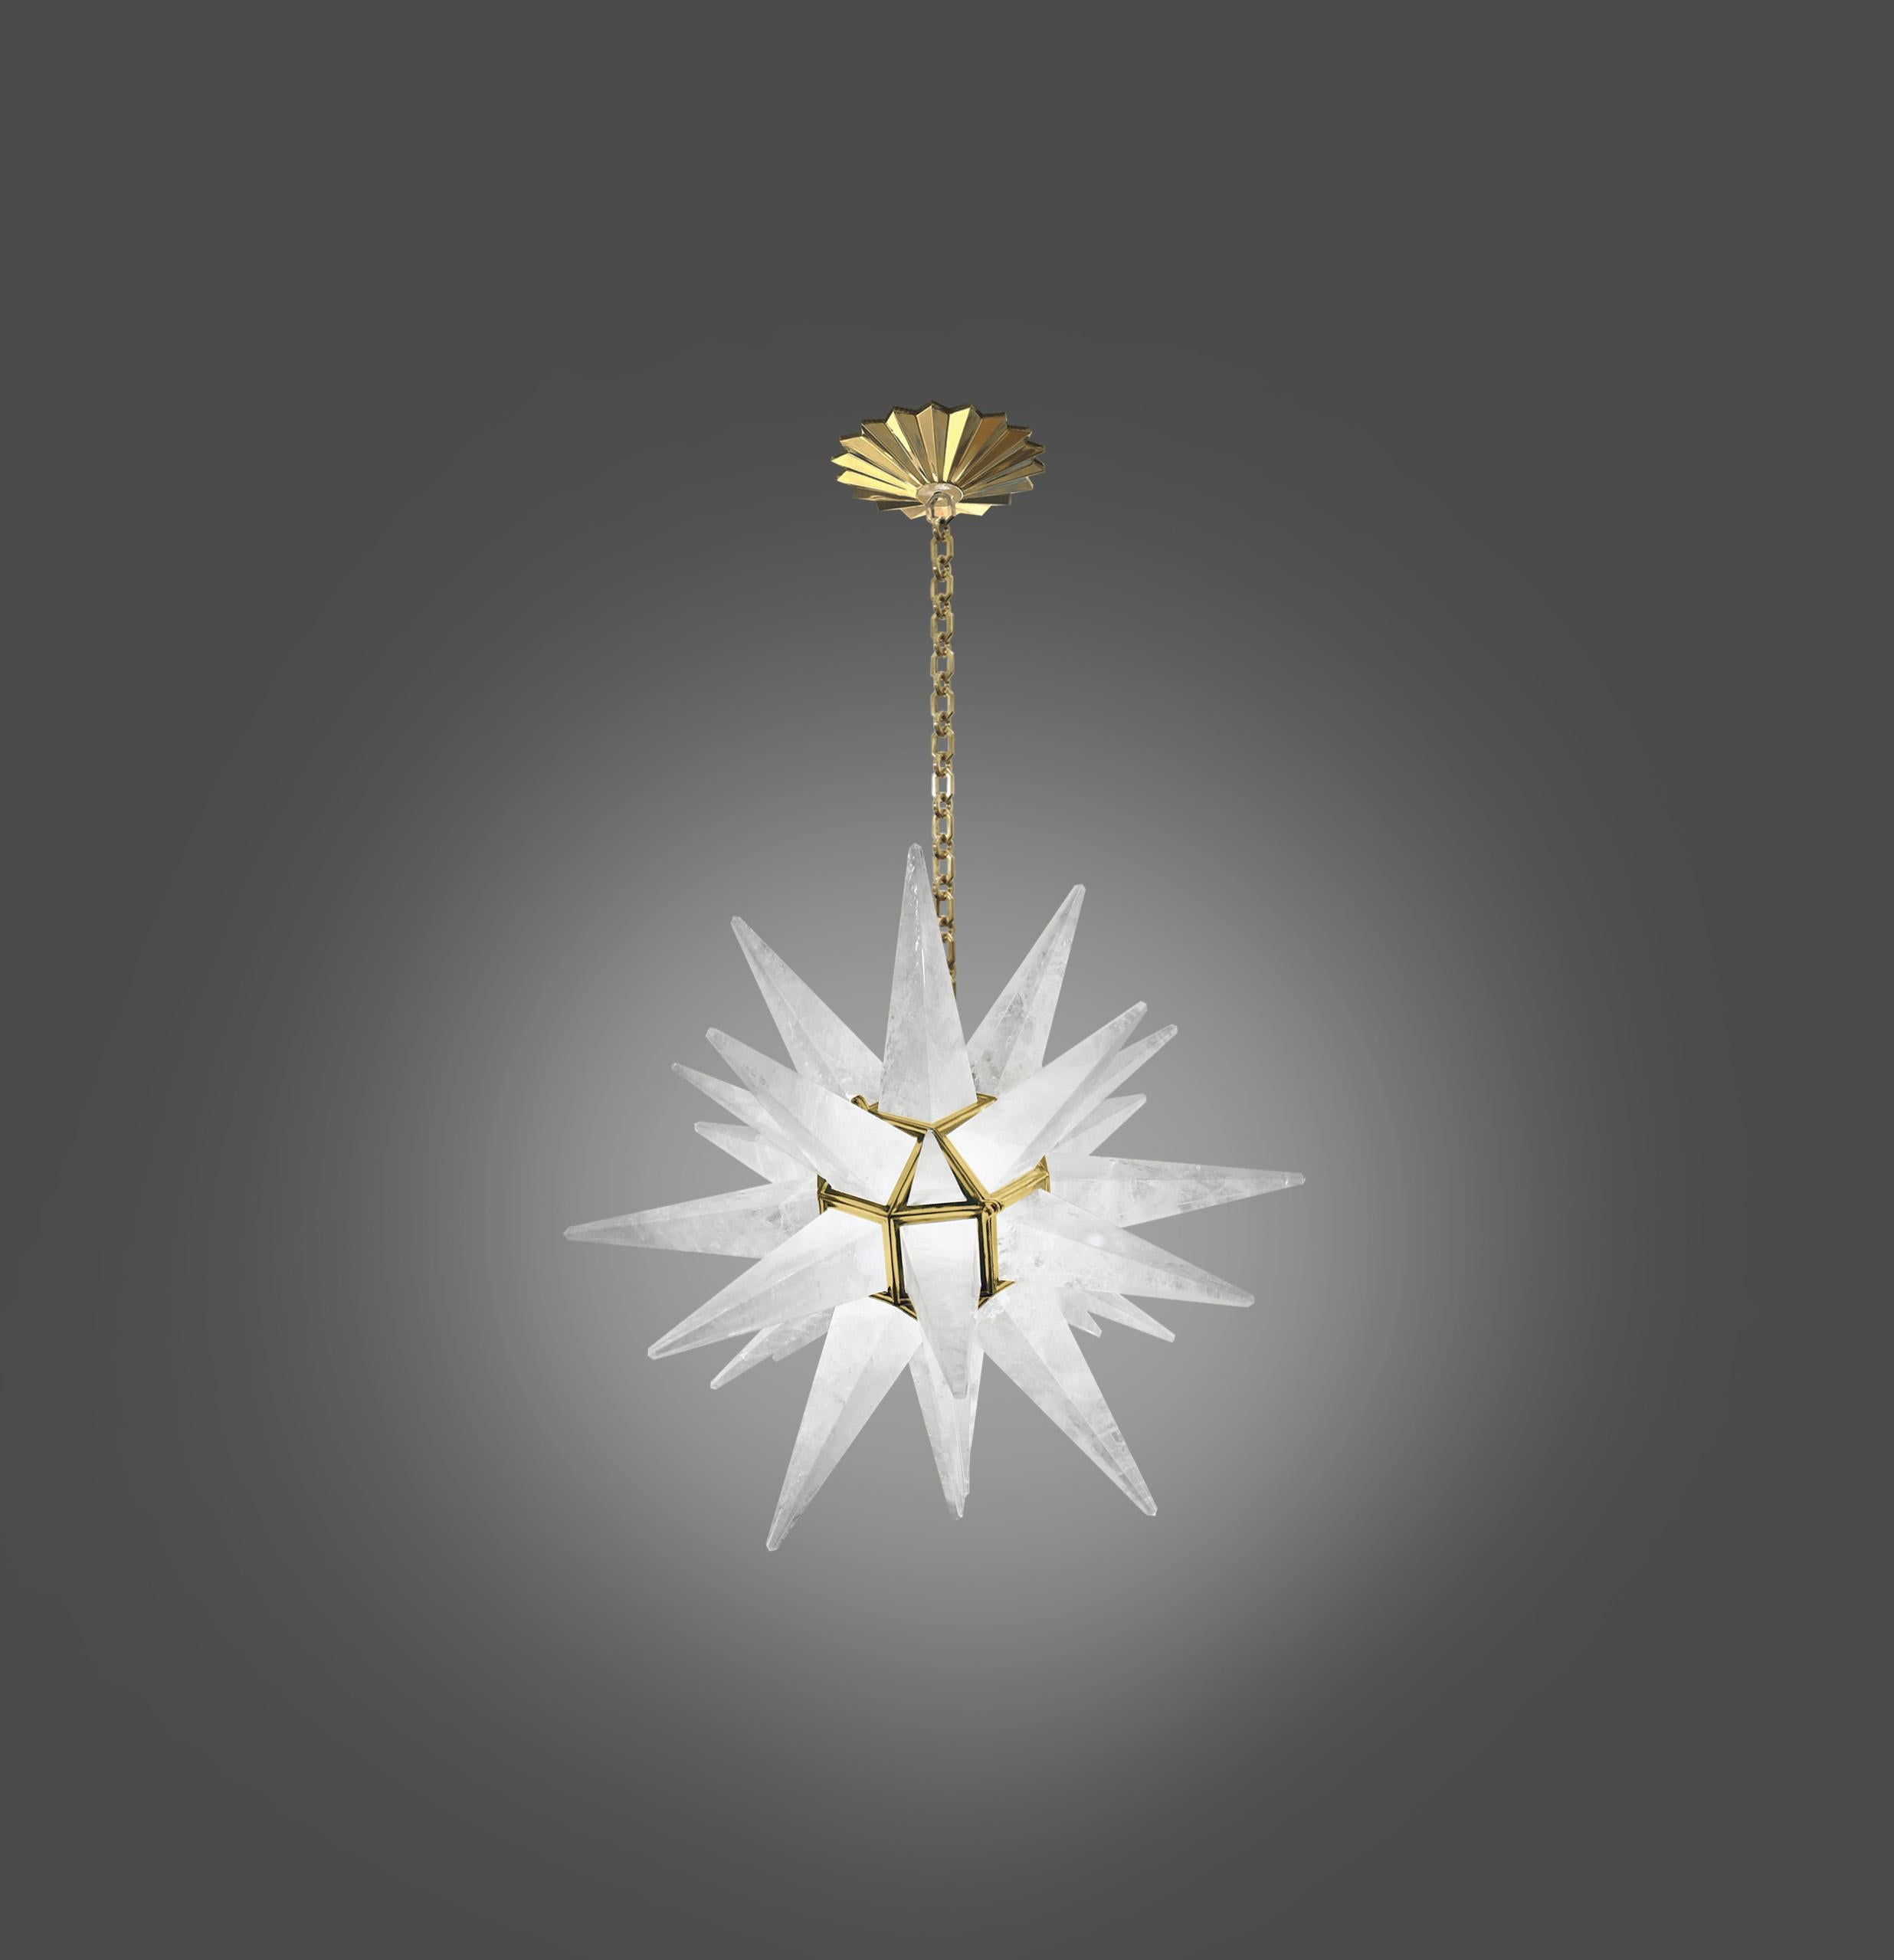 star forms rock crystal chandelier with polished brass frame. Created by Phoenix Gallery, NYC. 
2 sockets installed. Use two 100 watts led warm light bulbs. 
Custom size upon request.
Height can be adjustable.